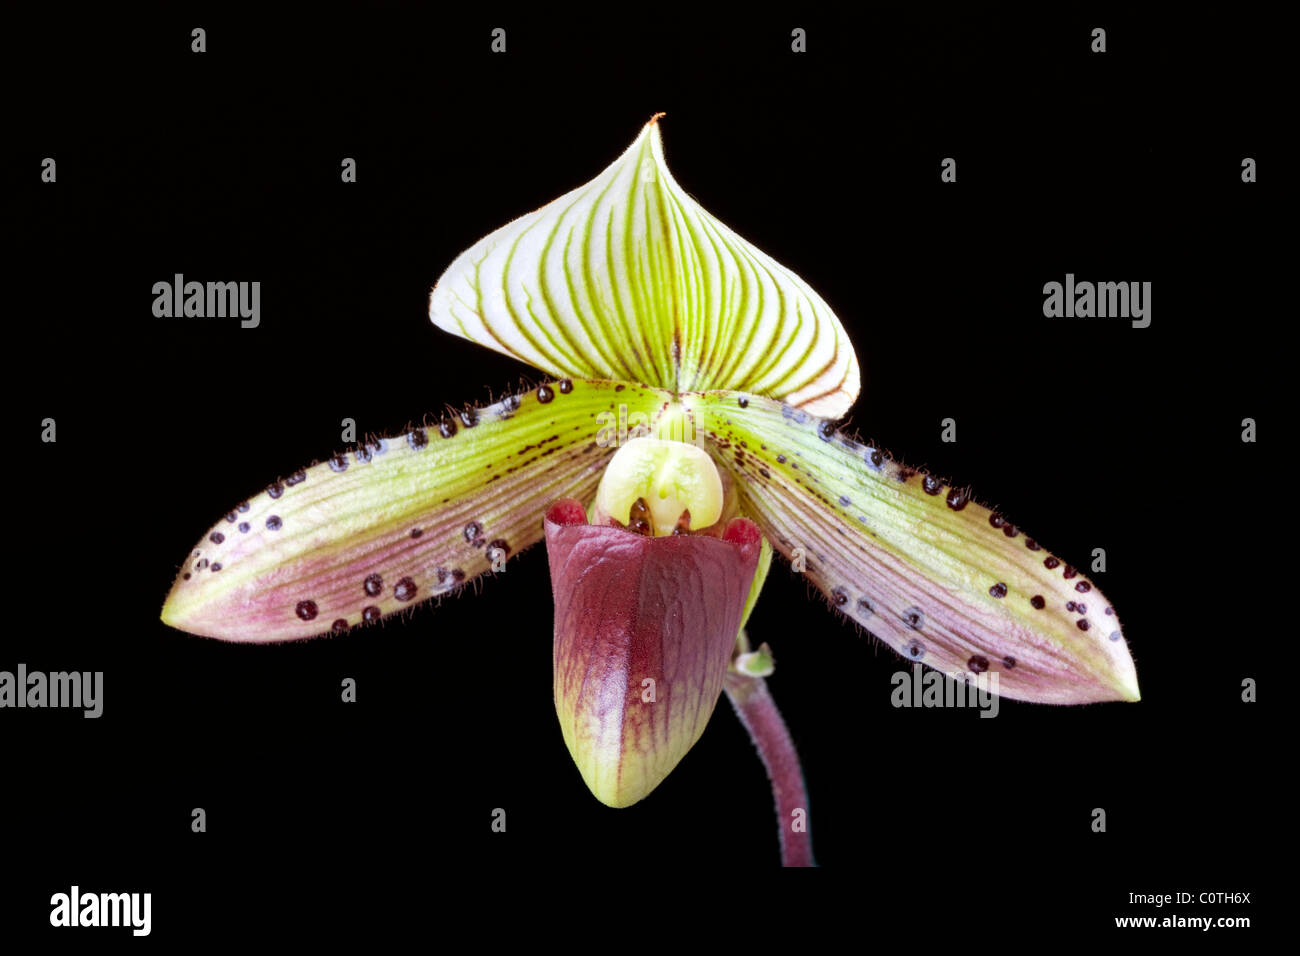 close-up of lady slipper orchid against black background Stock Photo